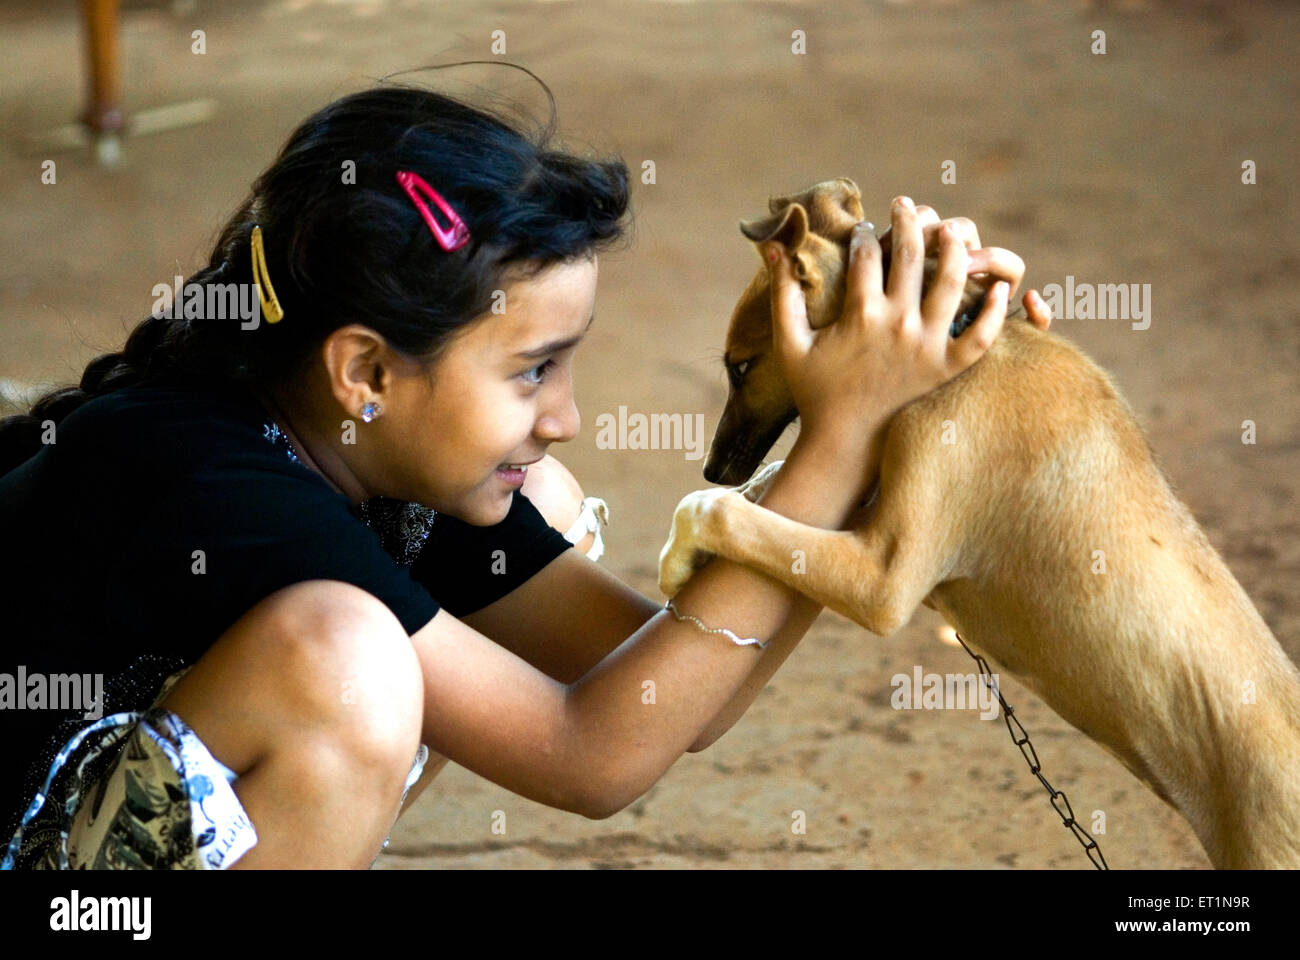 Young girl and puppy small dog in playing mood MR#556 Stock Photo